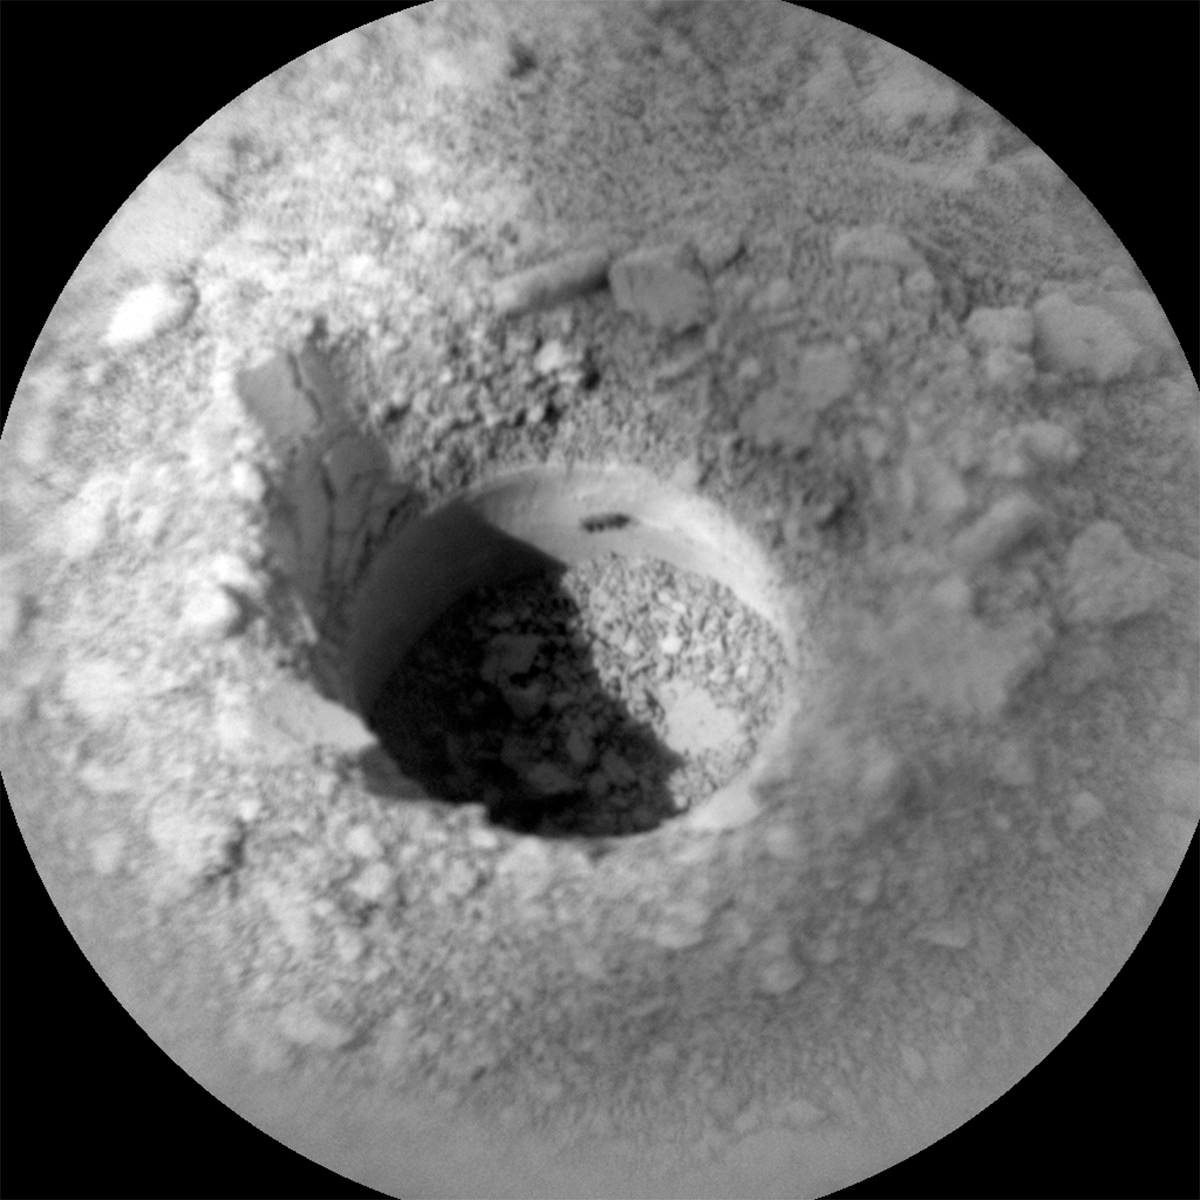 RMI of the Avanavero drill hole and fines taken by Curiosity's ChemCam on Sol 3523.